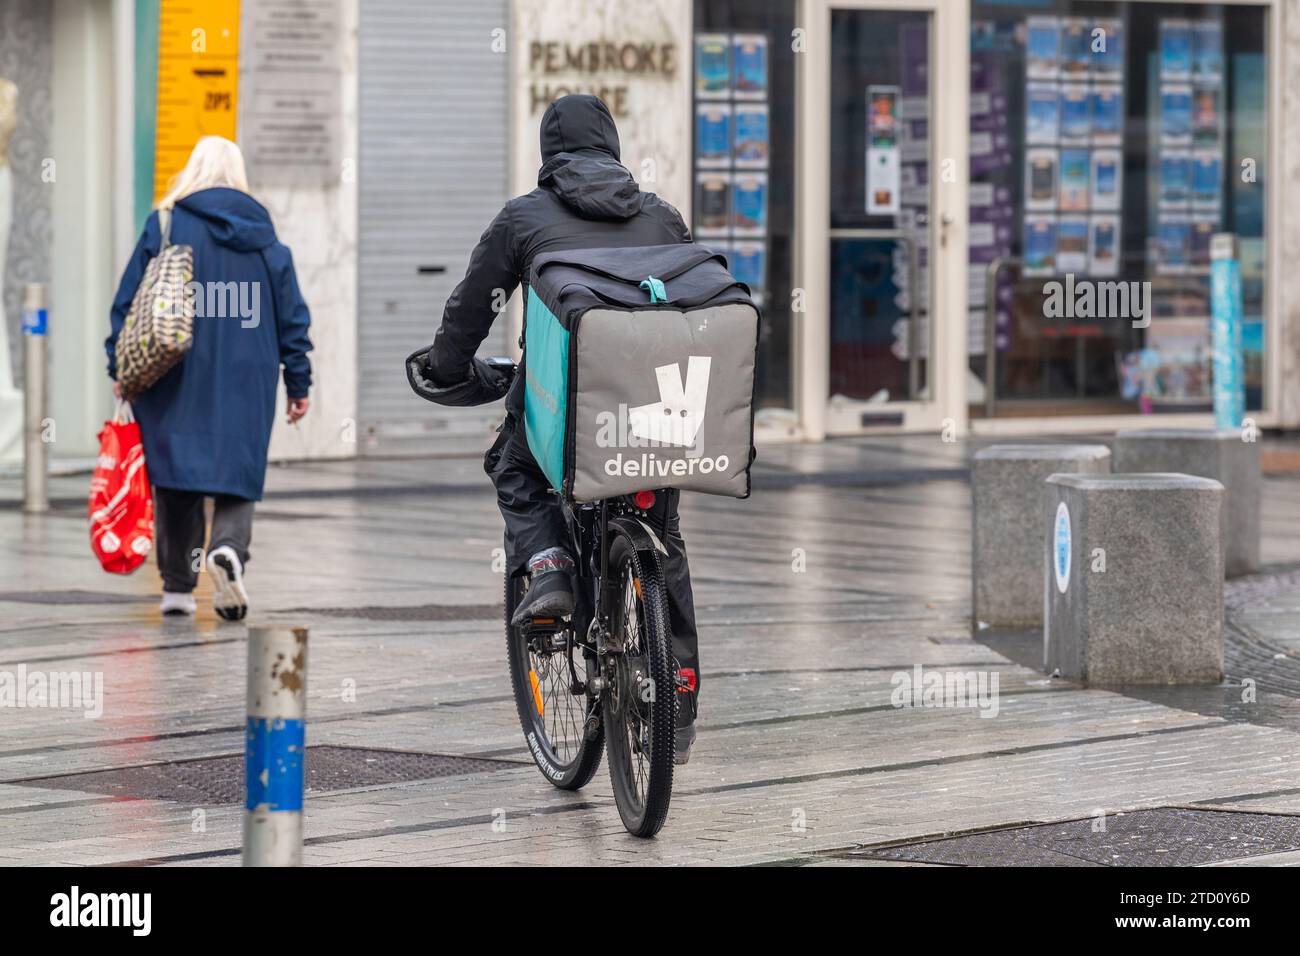 Deliveroo rider on a push bike making a food delivery in Cork, Ireland. Stock Photo